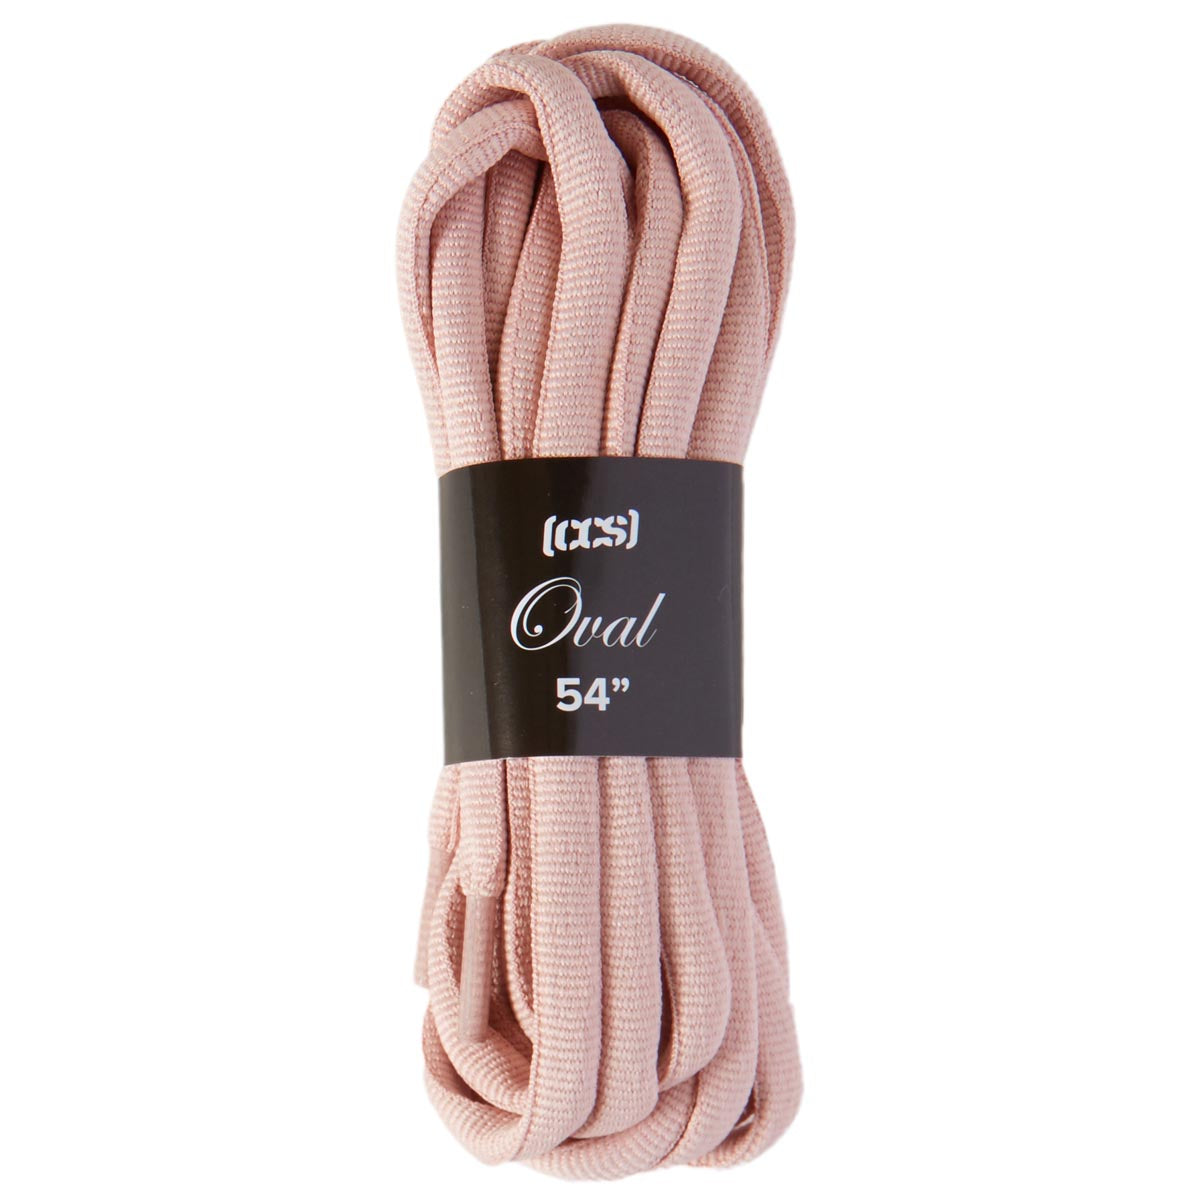 CCS Oval Shoelaces - Light Pink image 1